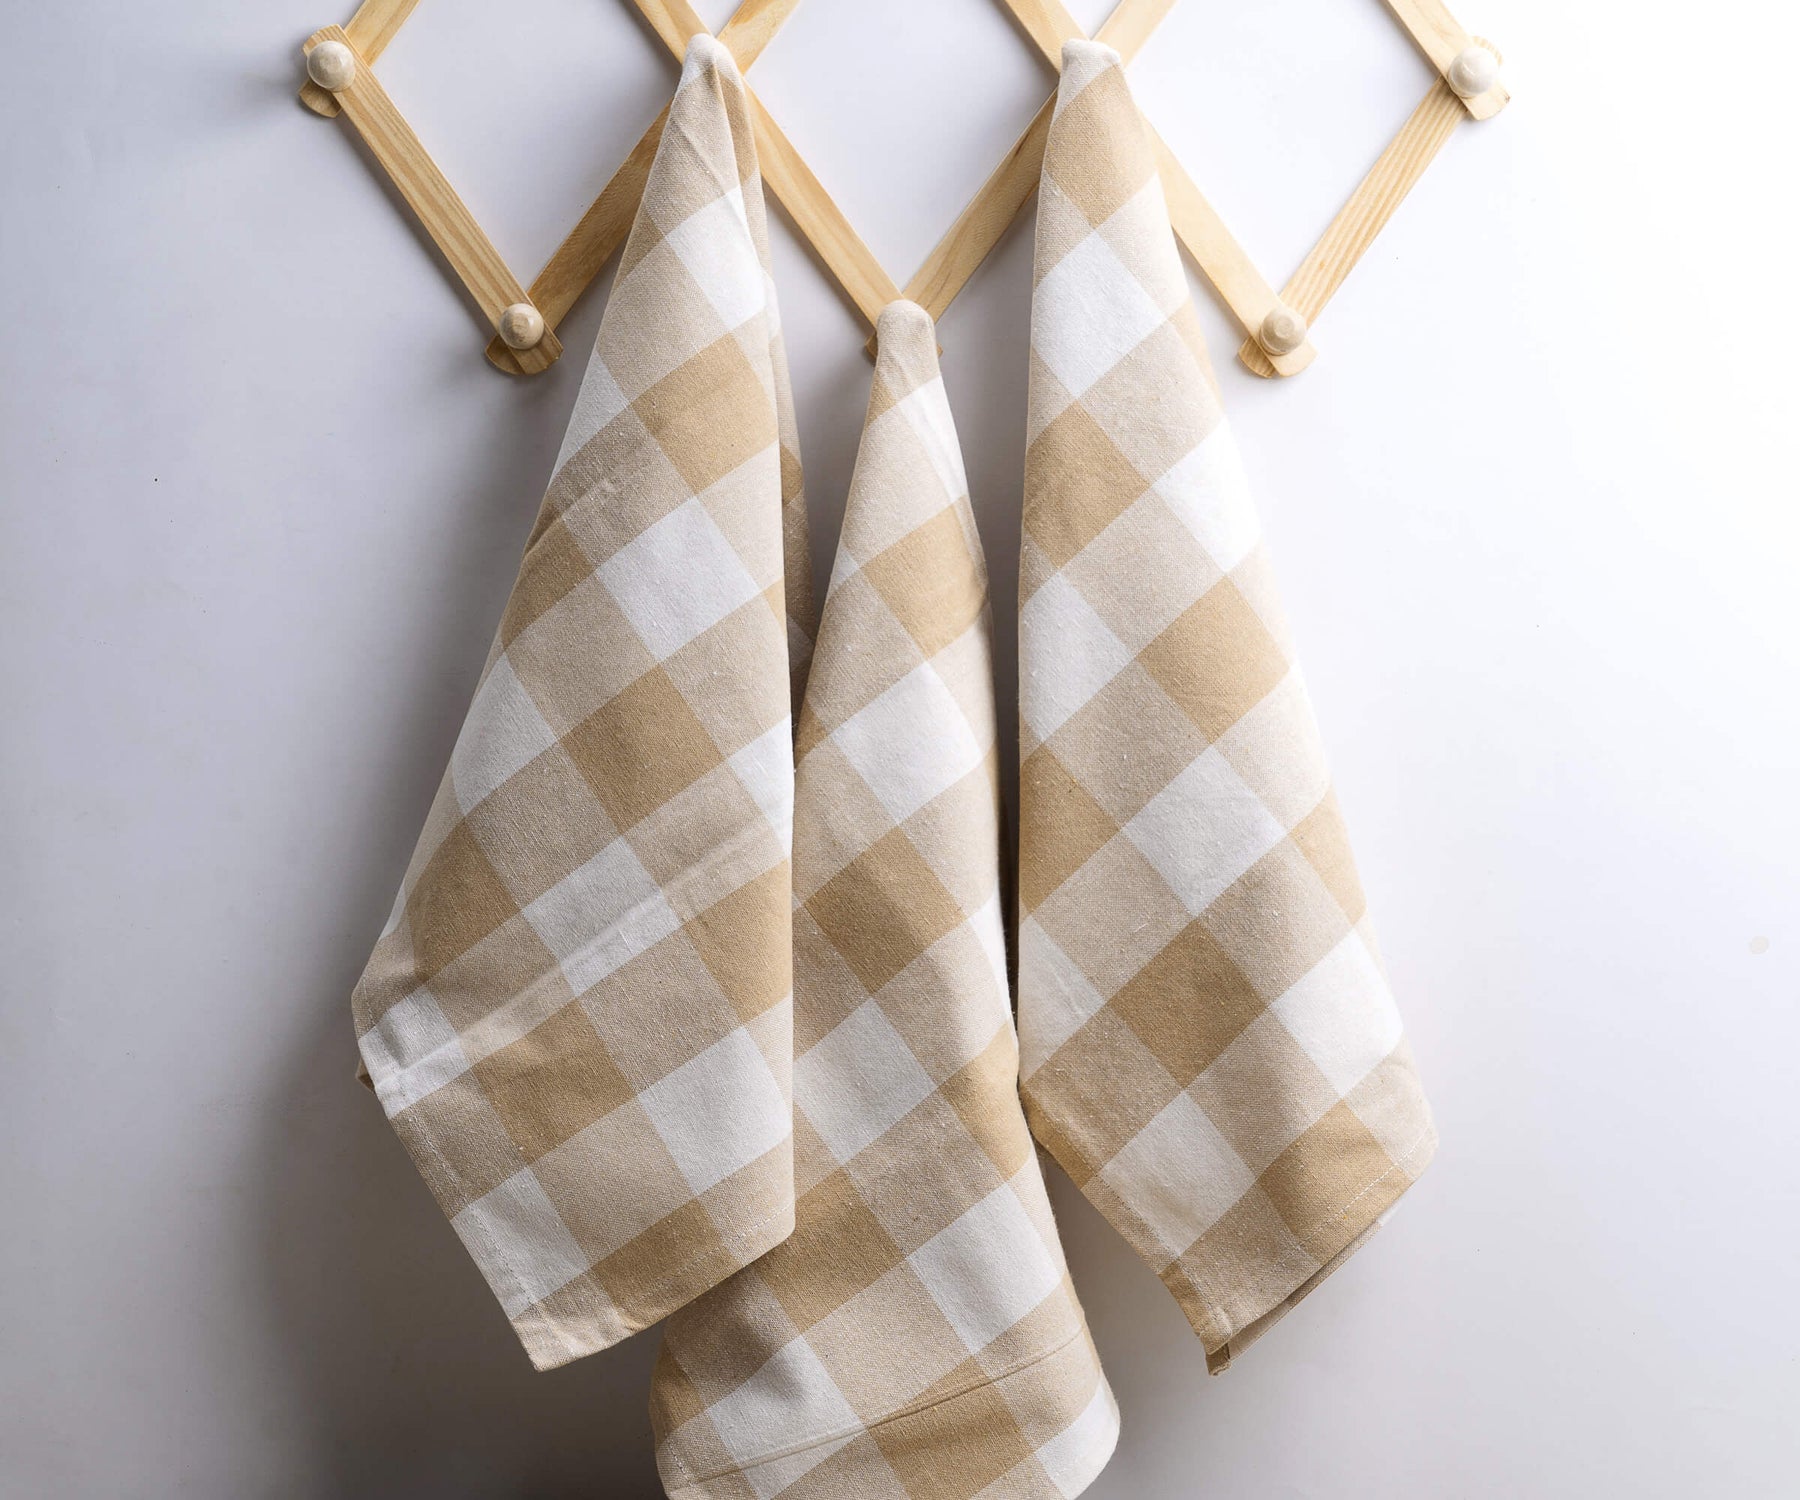 A set of kitchen towels is a great way to add a touch of personality to your kitchen. You can choose towels in your favorite color or patter beige cotton dishtowel